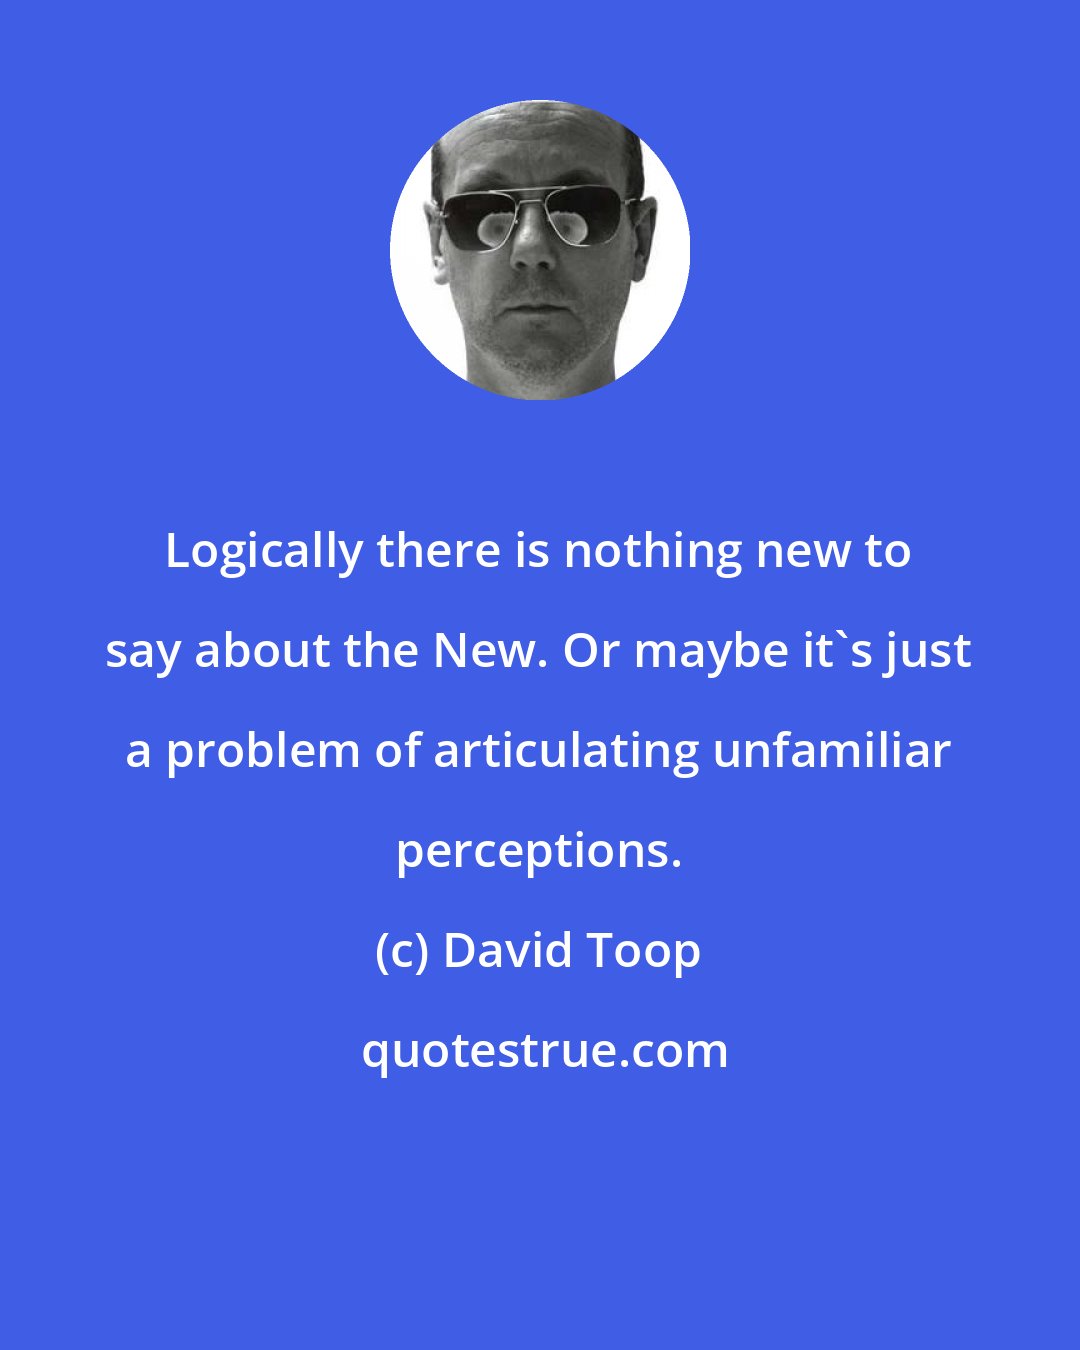 David Toop: Logically there is nothing new to say about the New. Or maybe it's just a problem of articulating unfamiliar perceptions.